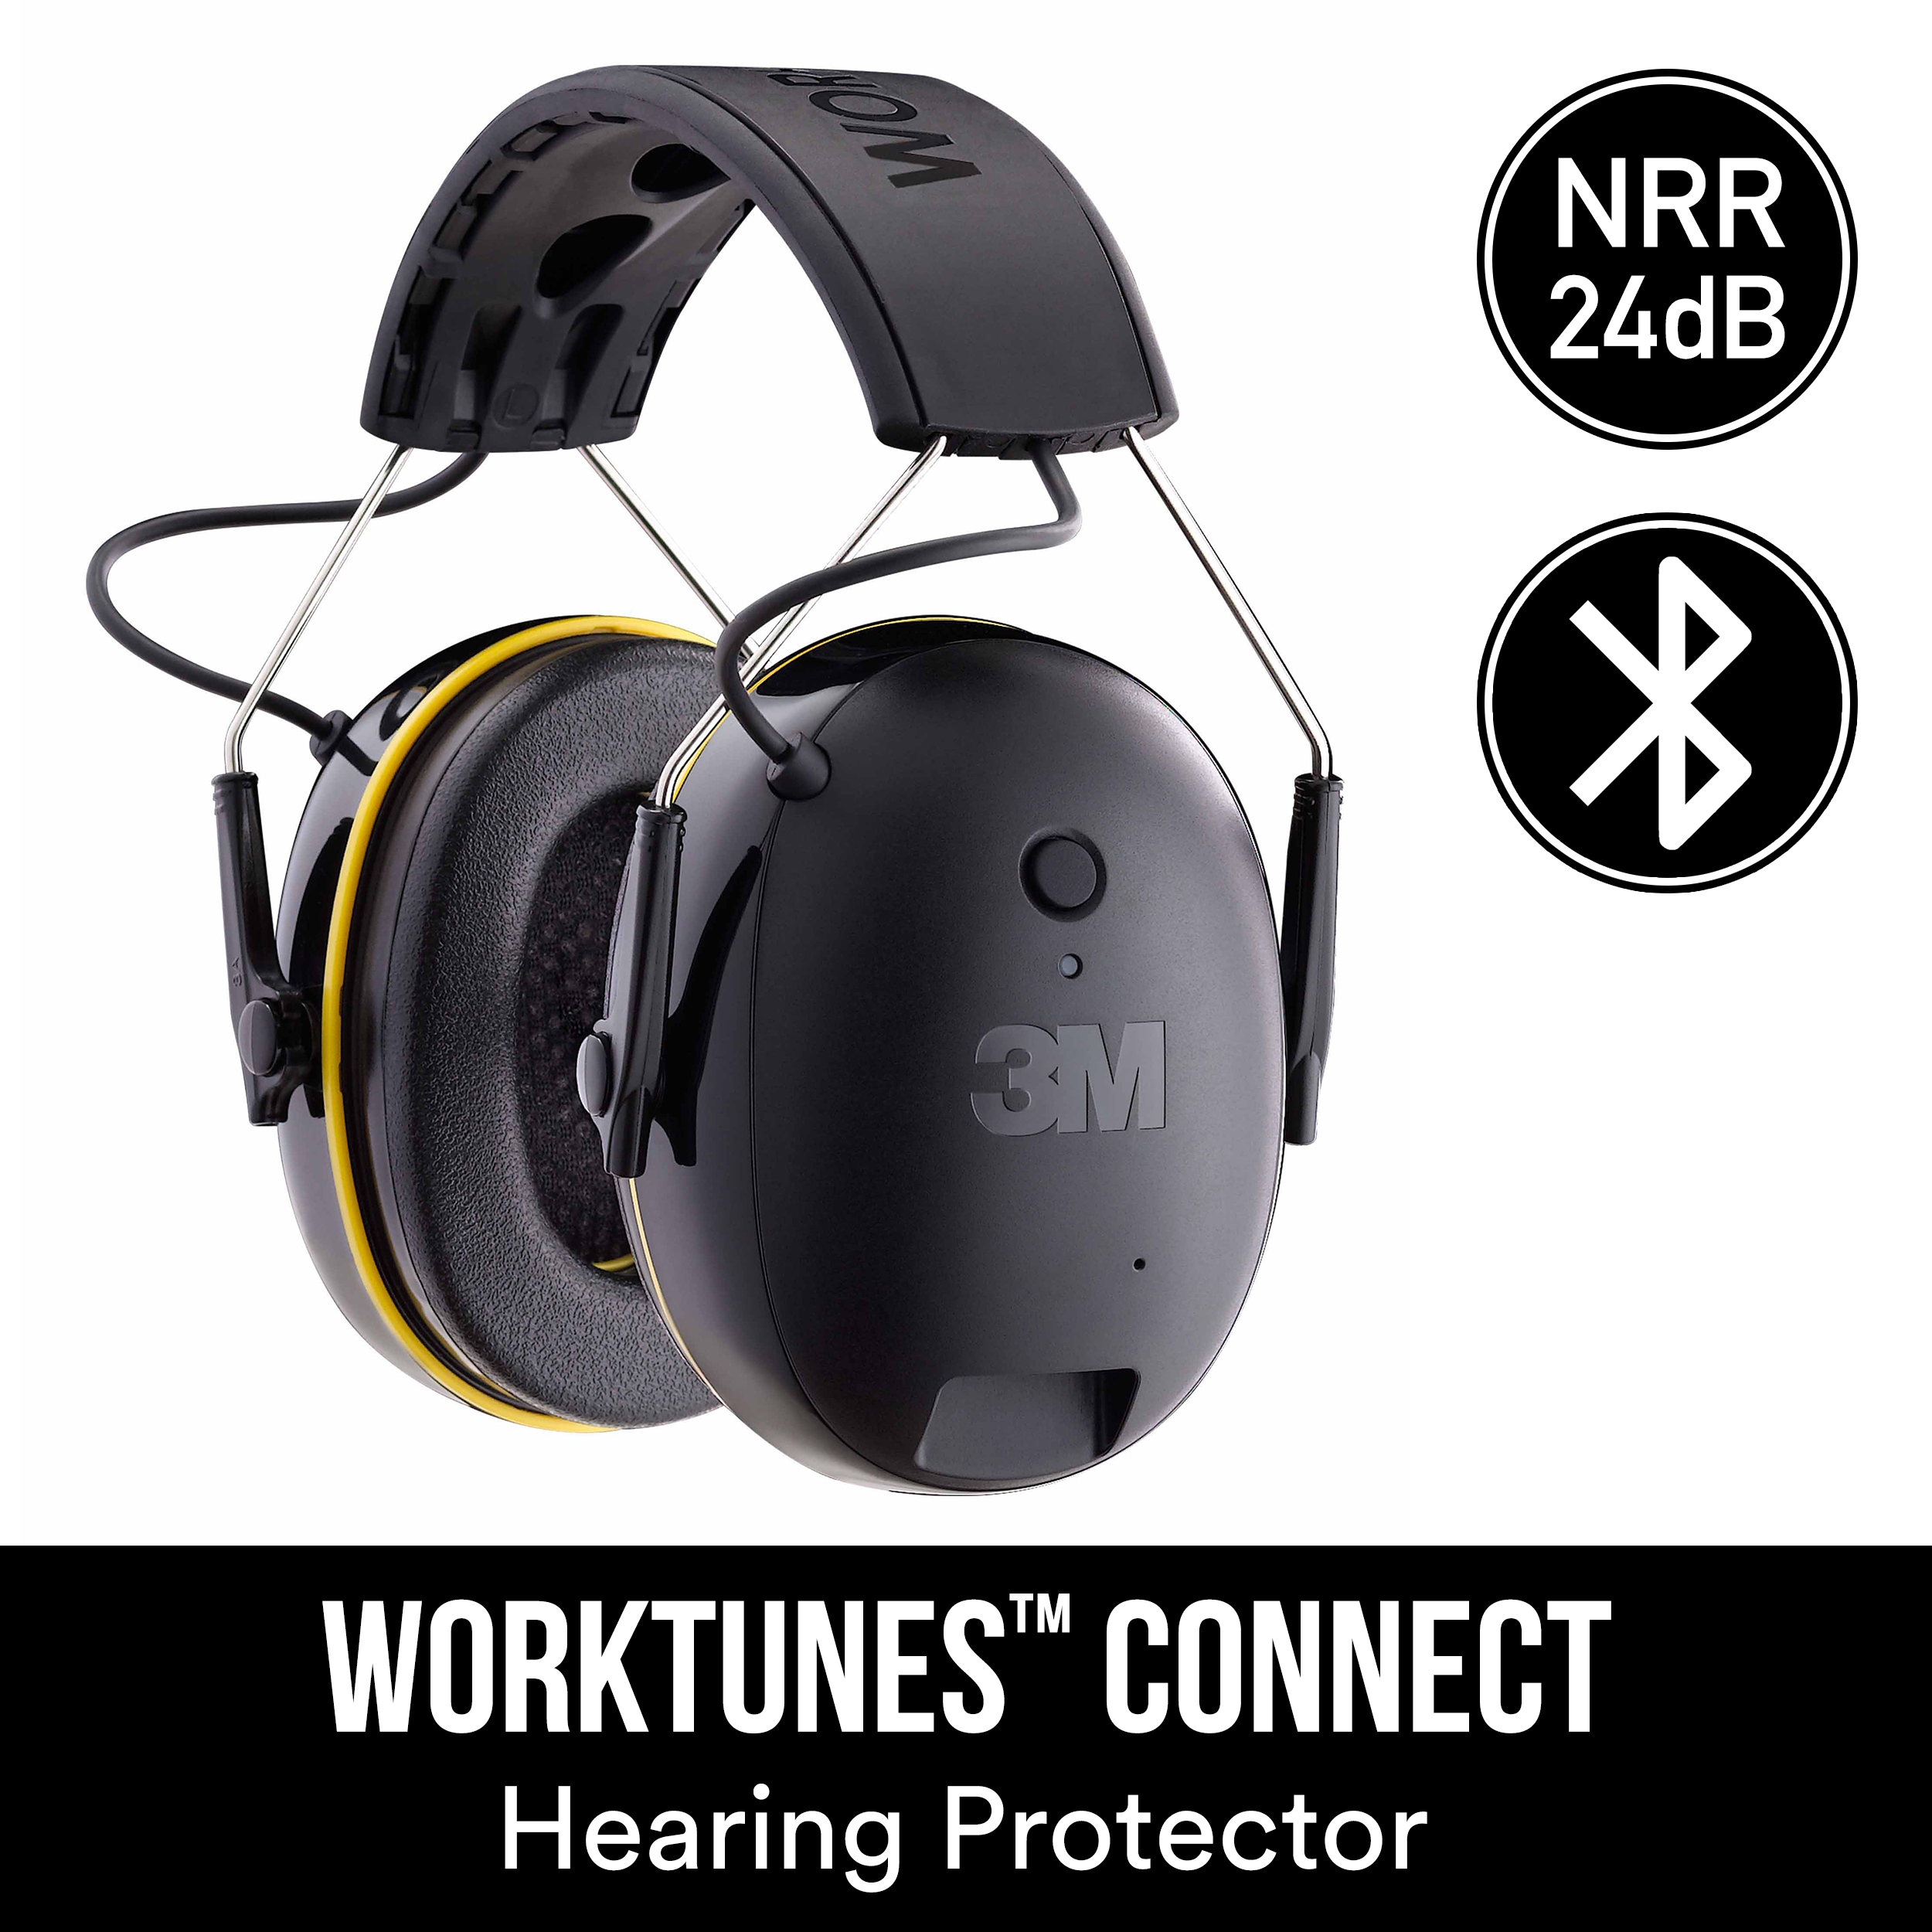 SKU 7100160539 | 3M™ WorkTunes™ Connect Wireless Hearing Protector with Bluetooth® Technology